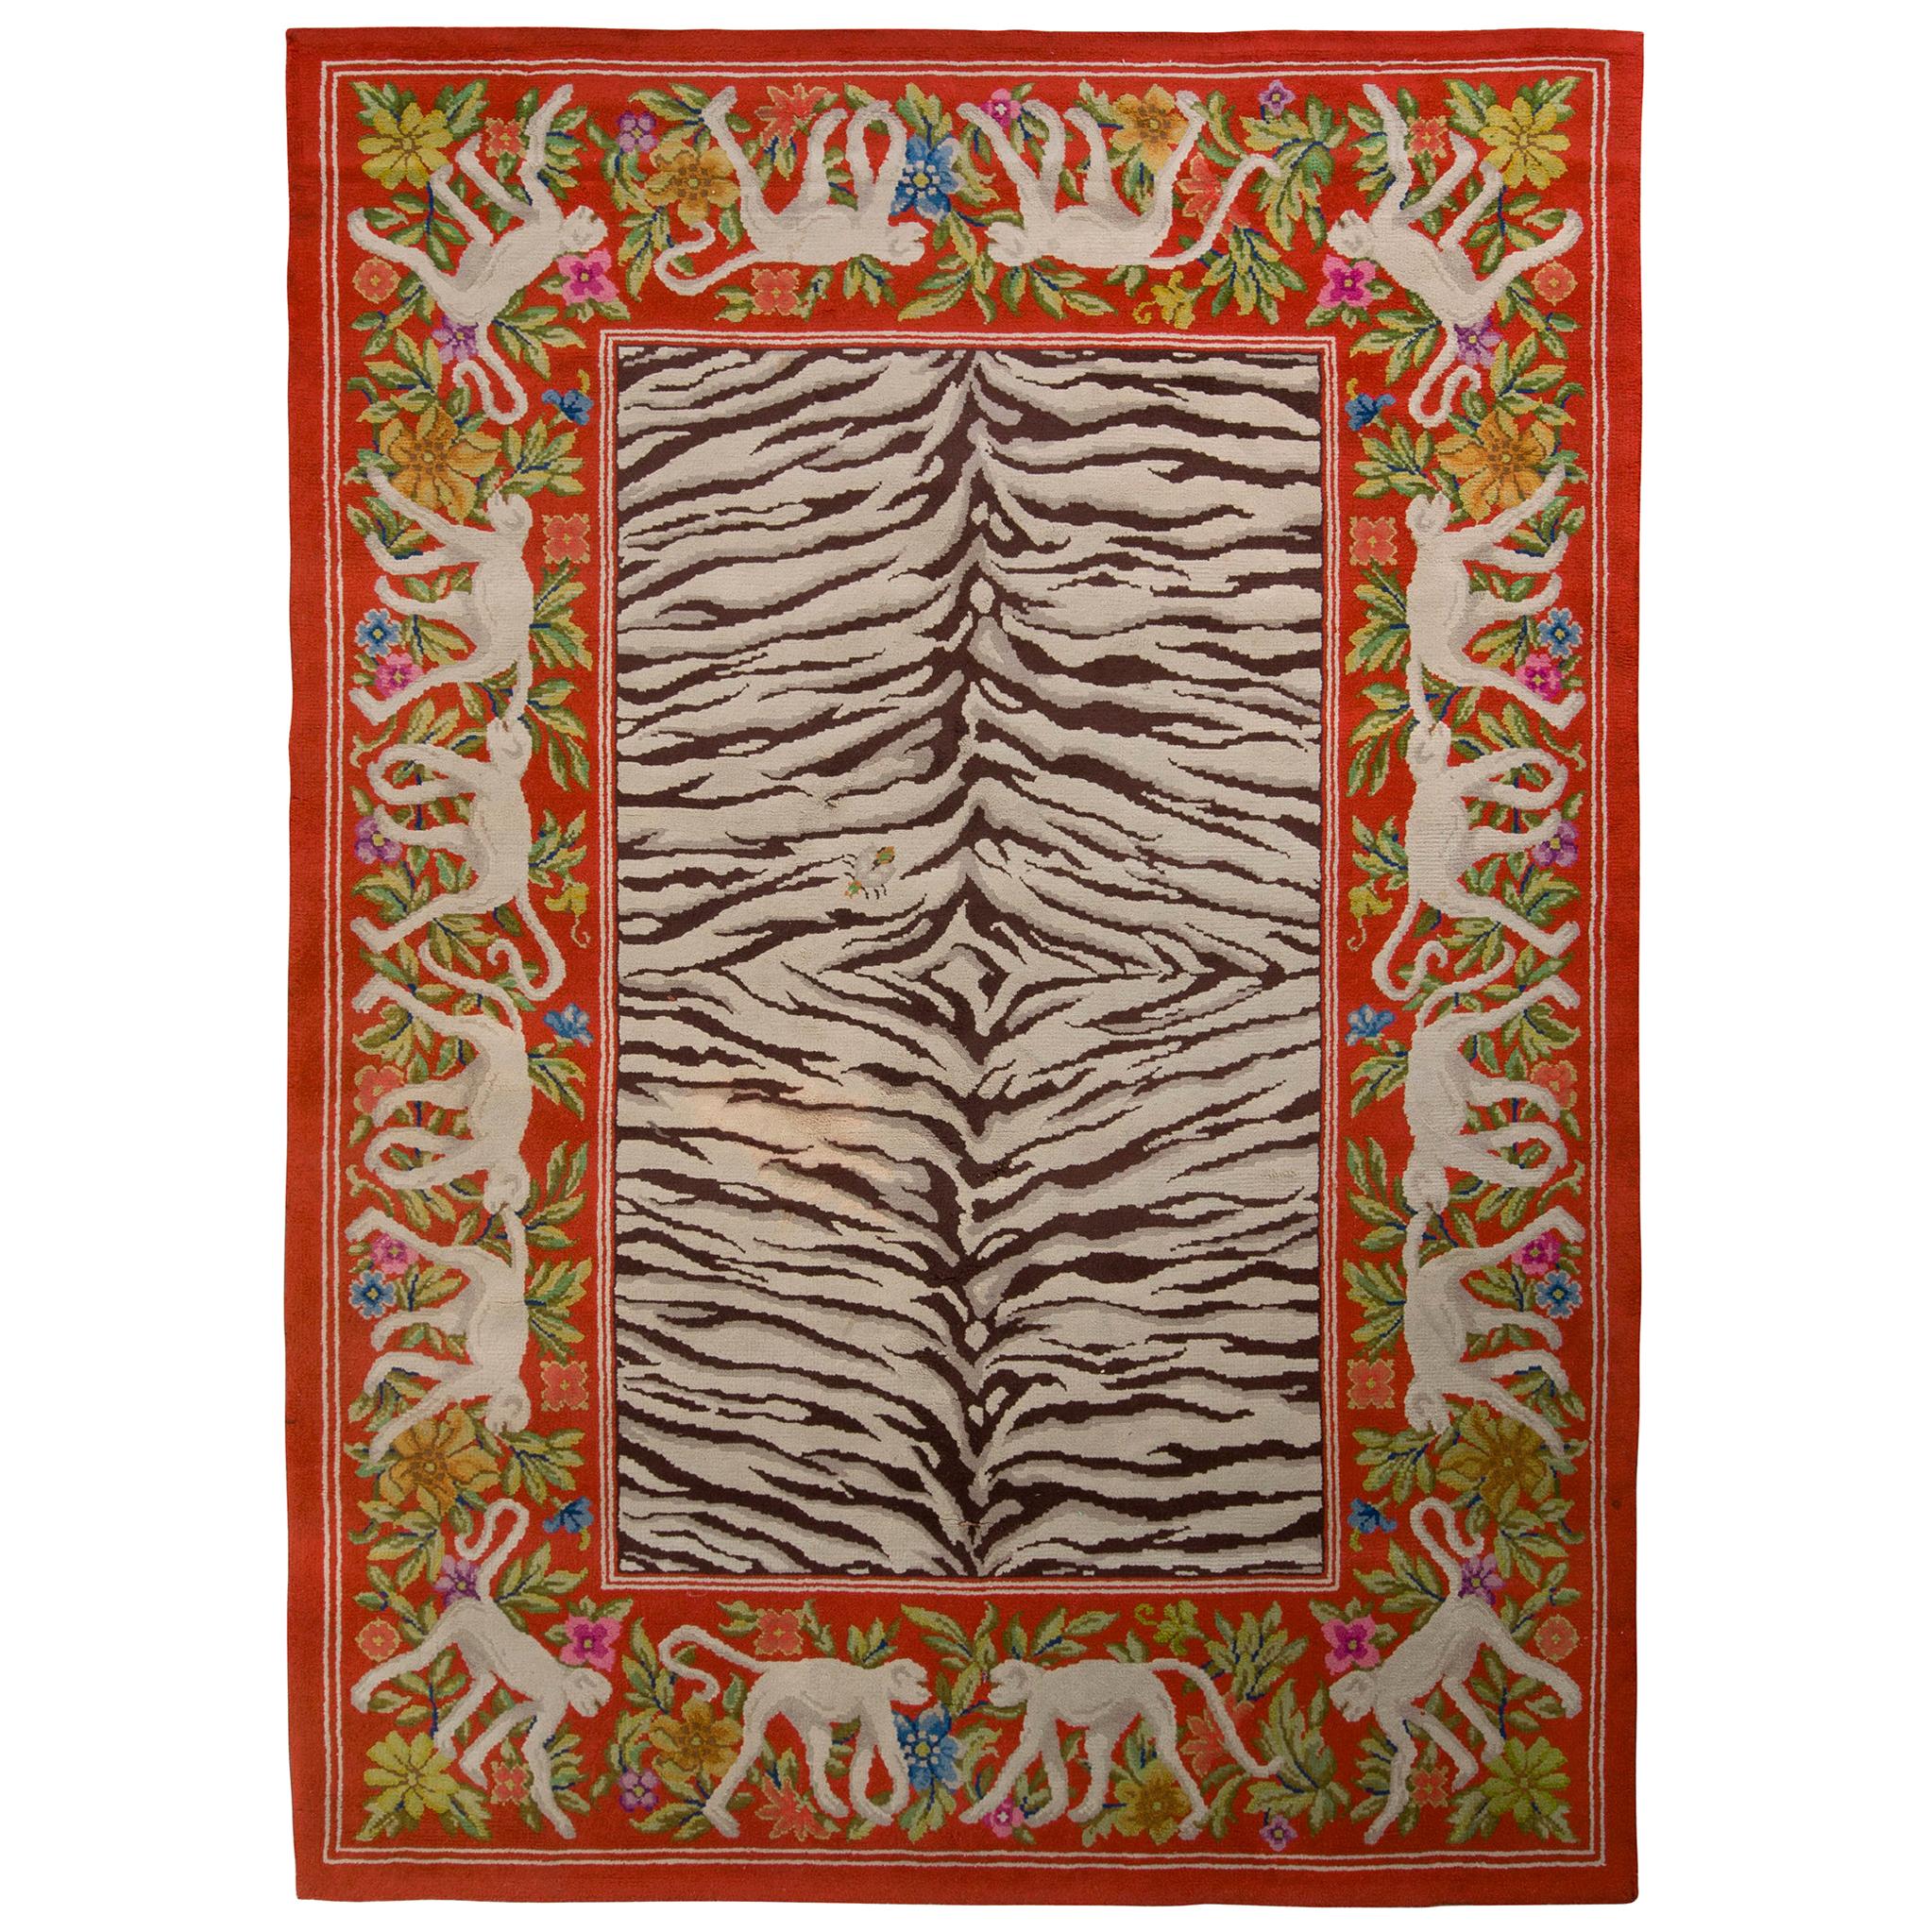 Hand-Knotted Vintage Pictorial Rug in Red and Beige Brown Animal Patterns